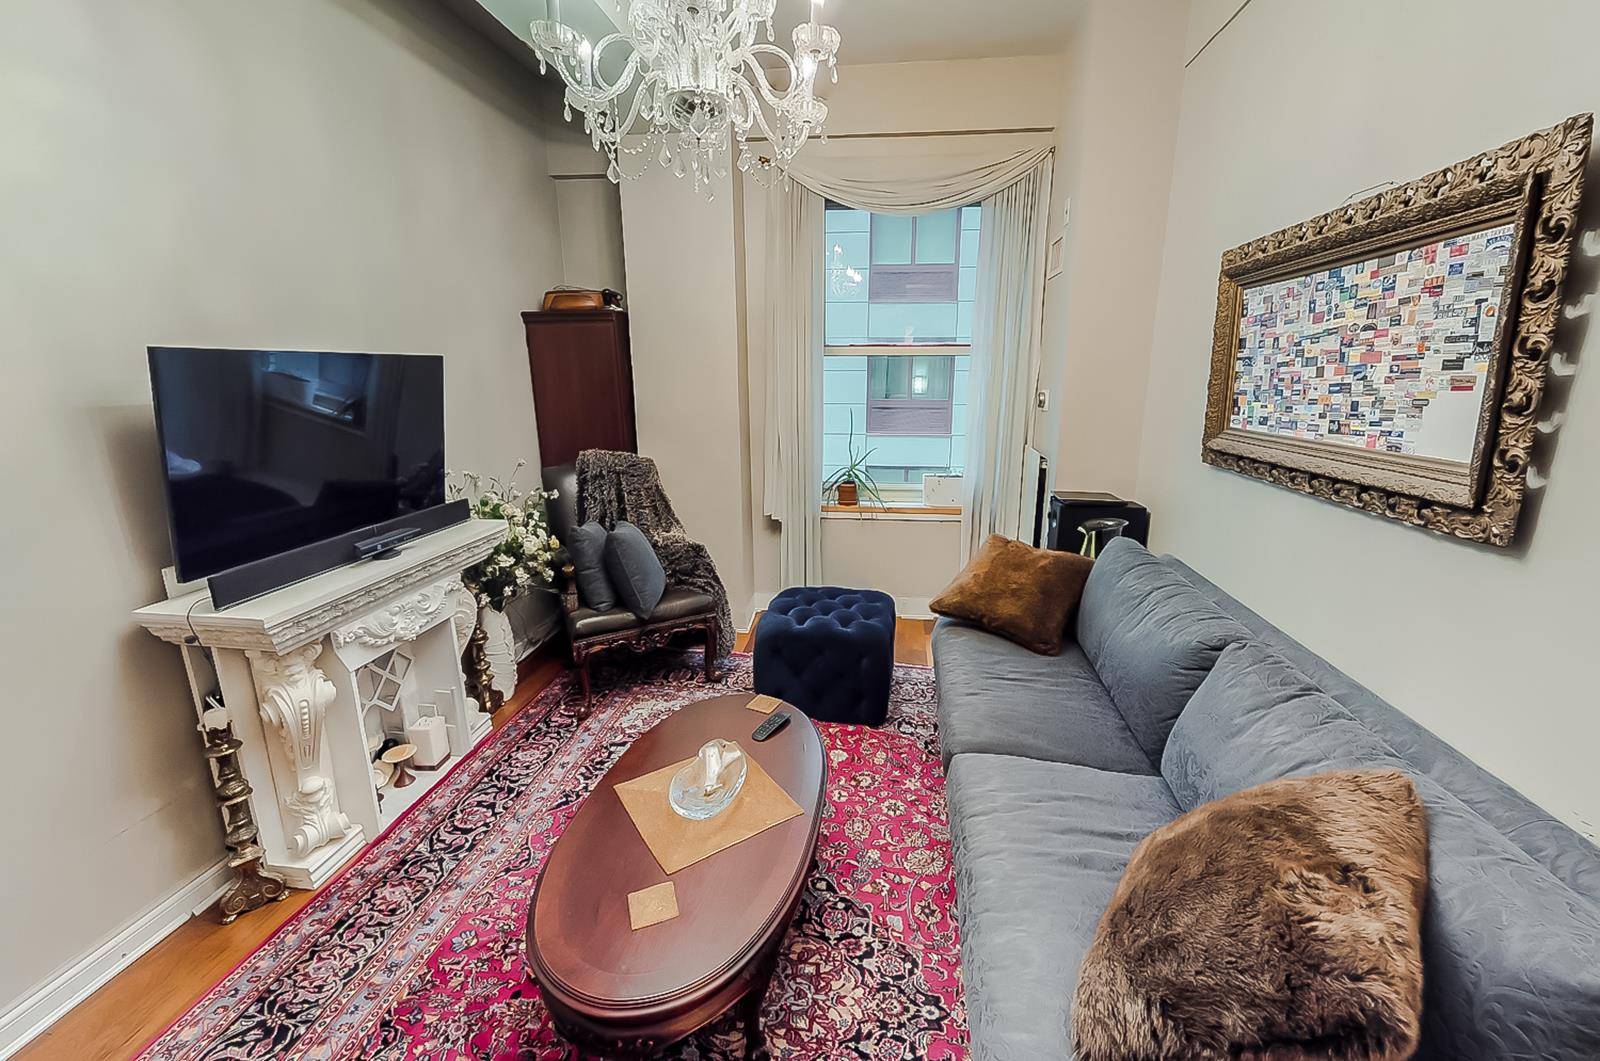 A spacious and bright one bedroom apartment in this fantastic condominium building in the Financial District.